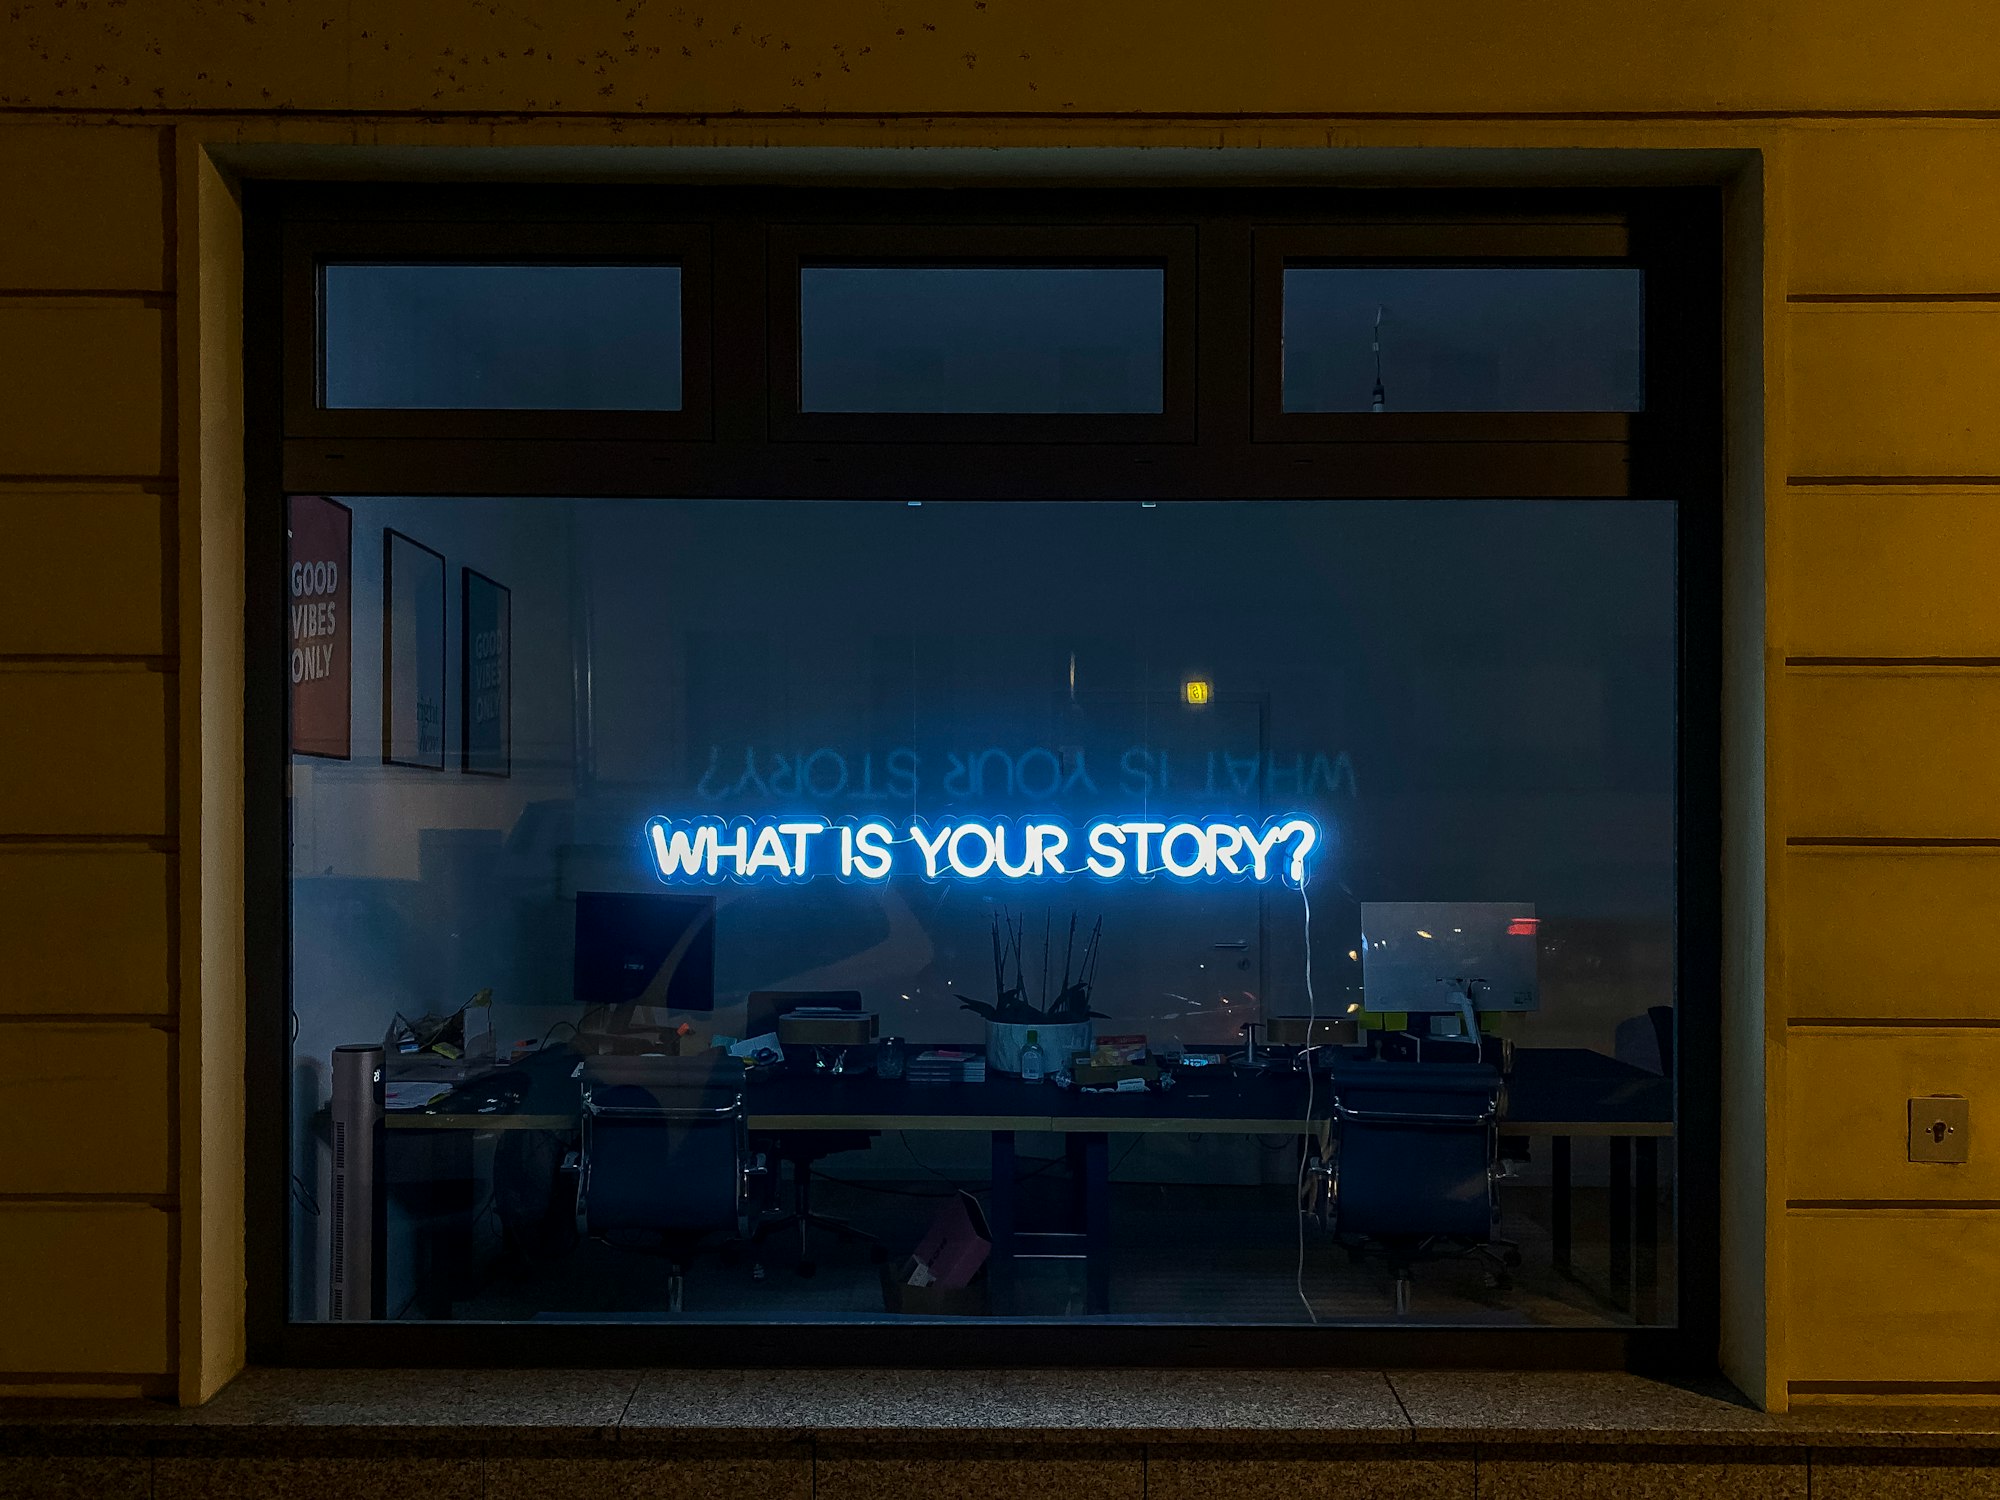 How to Gather Stories that Resonate with Your Community